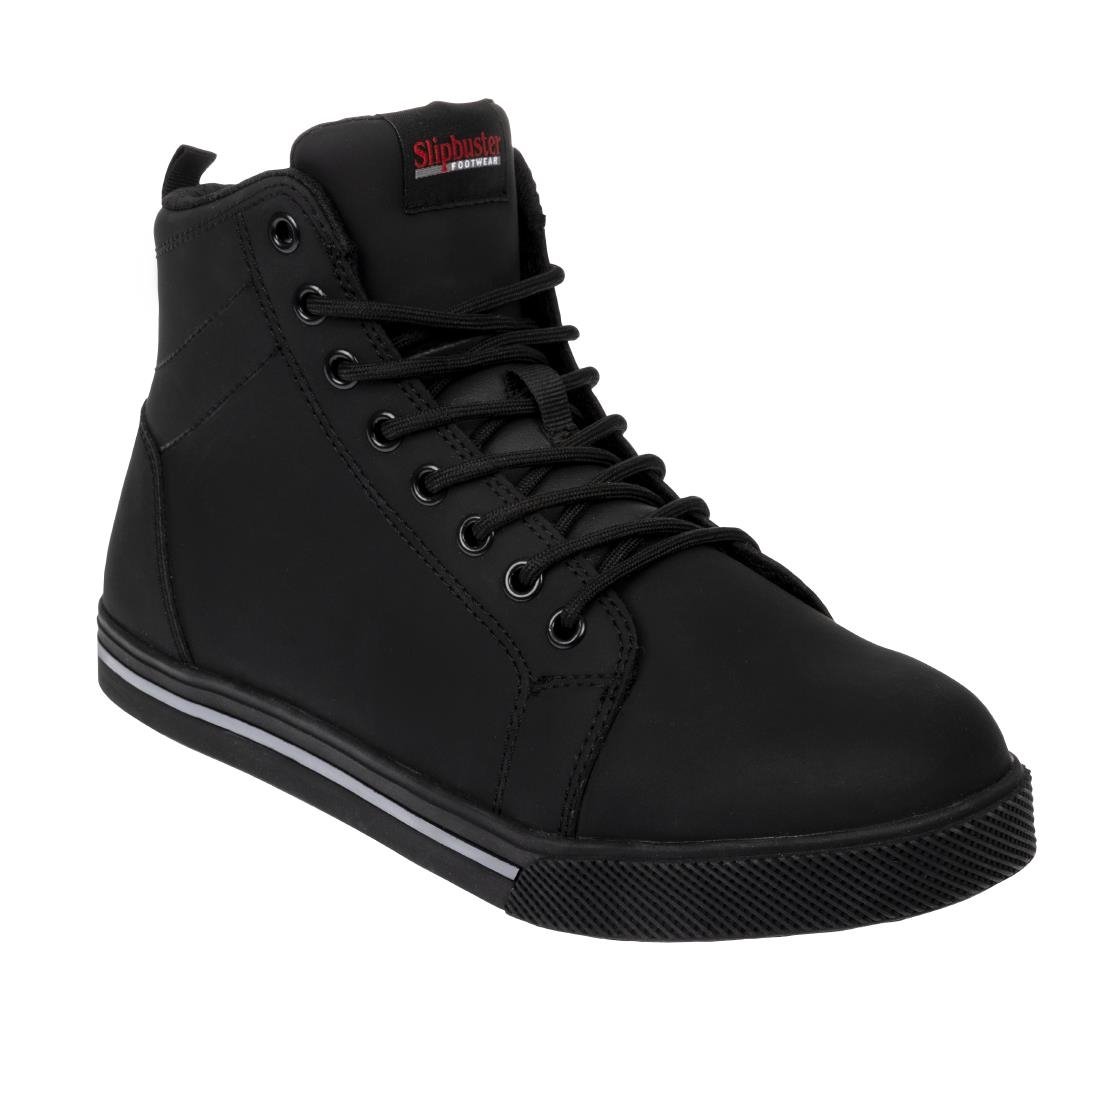 BA061-40 Slipbuster Recycled Microfibre Safety Hi Top Boots Matte Black 40 JD Catering Equipment Solutions Ltd